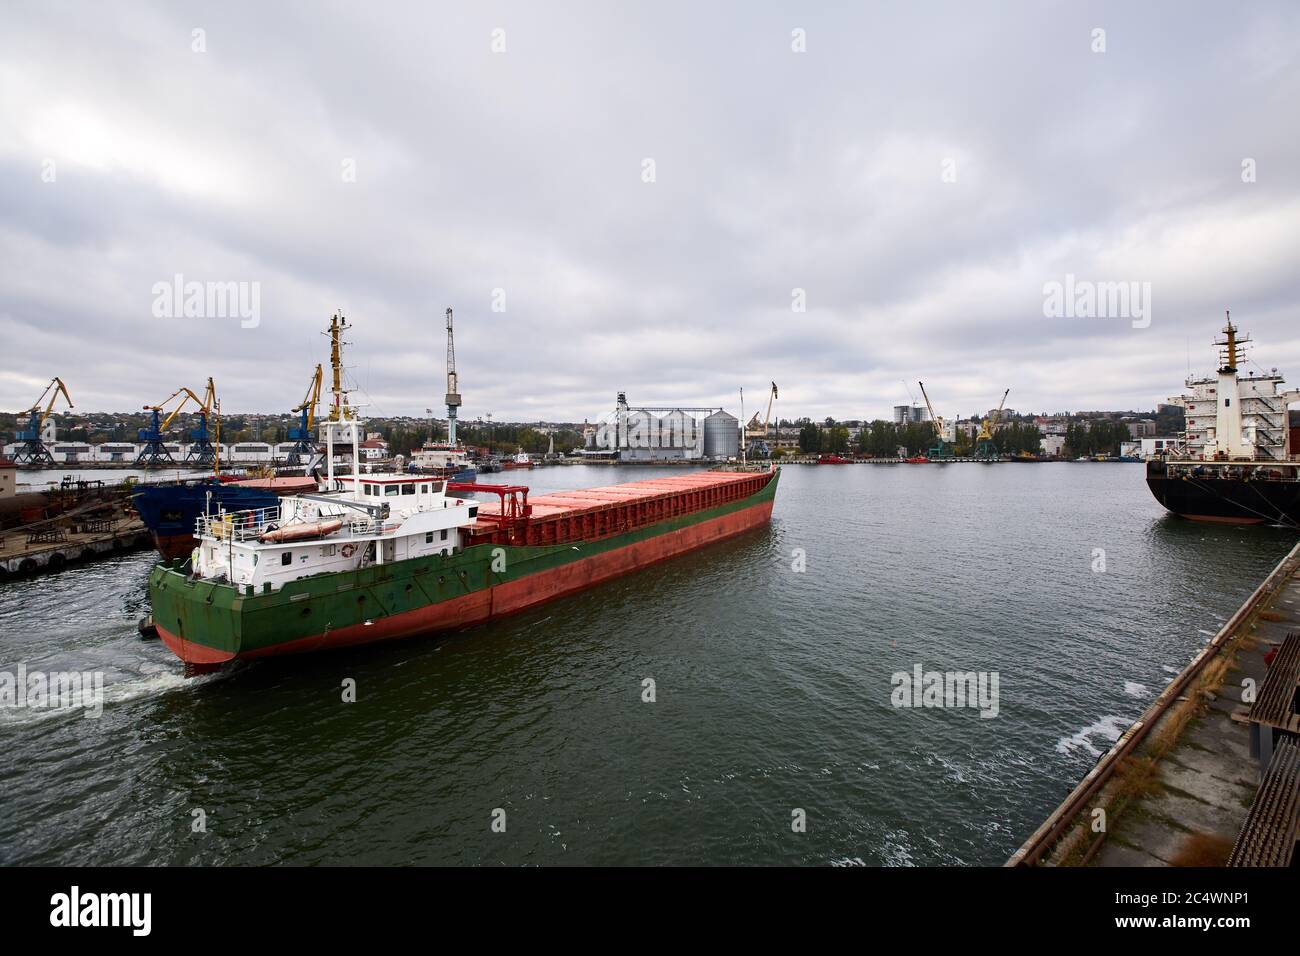 Large bulk ship entering the harbour of commercial dock at seaport to load at grain terminal elevators with wheat and other crops. Stock Photo